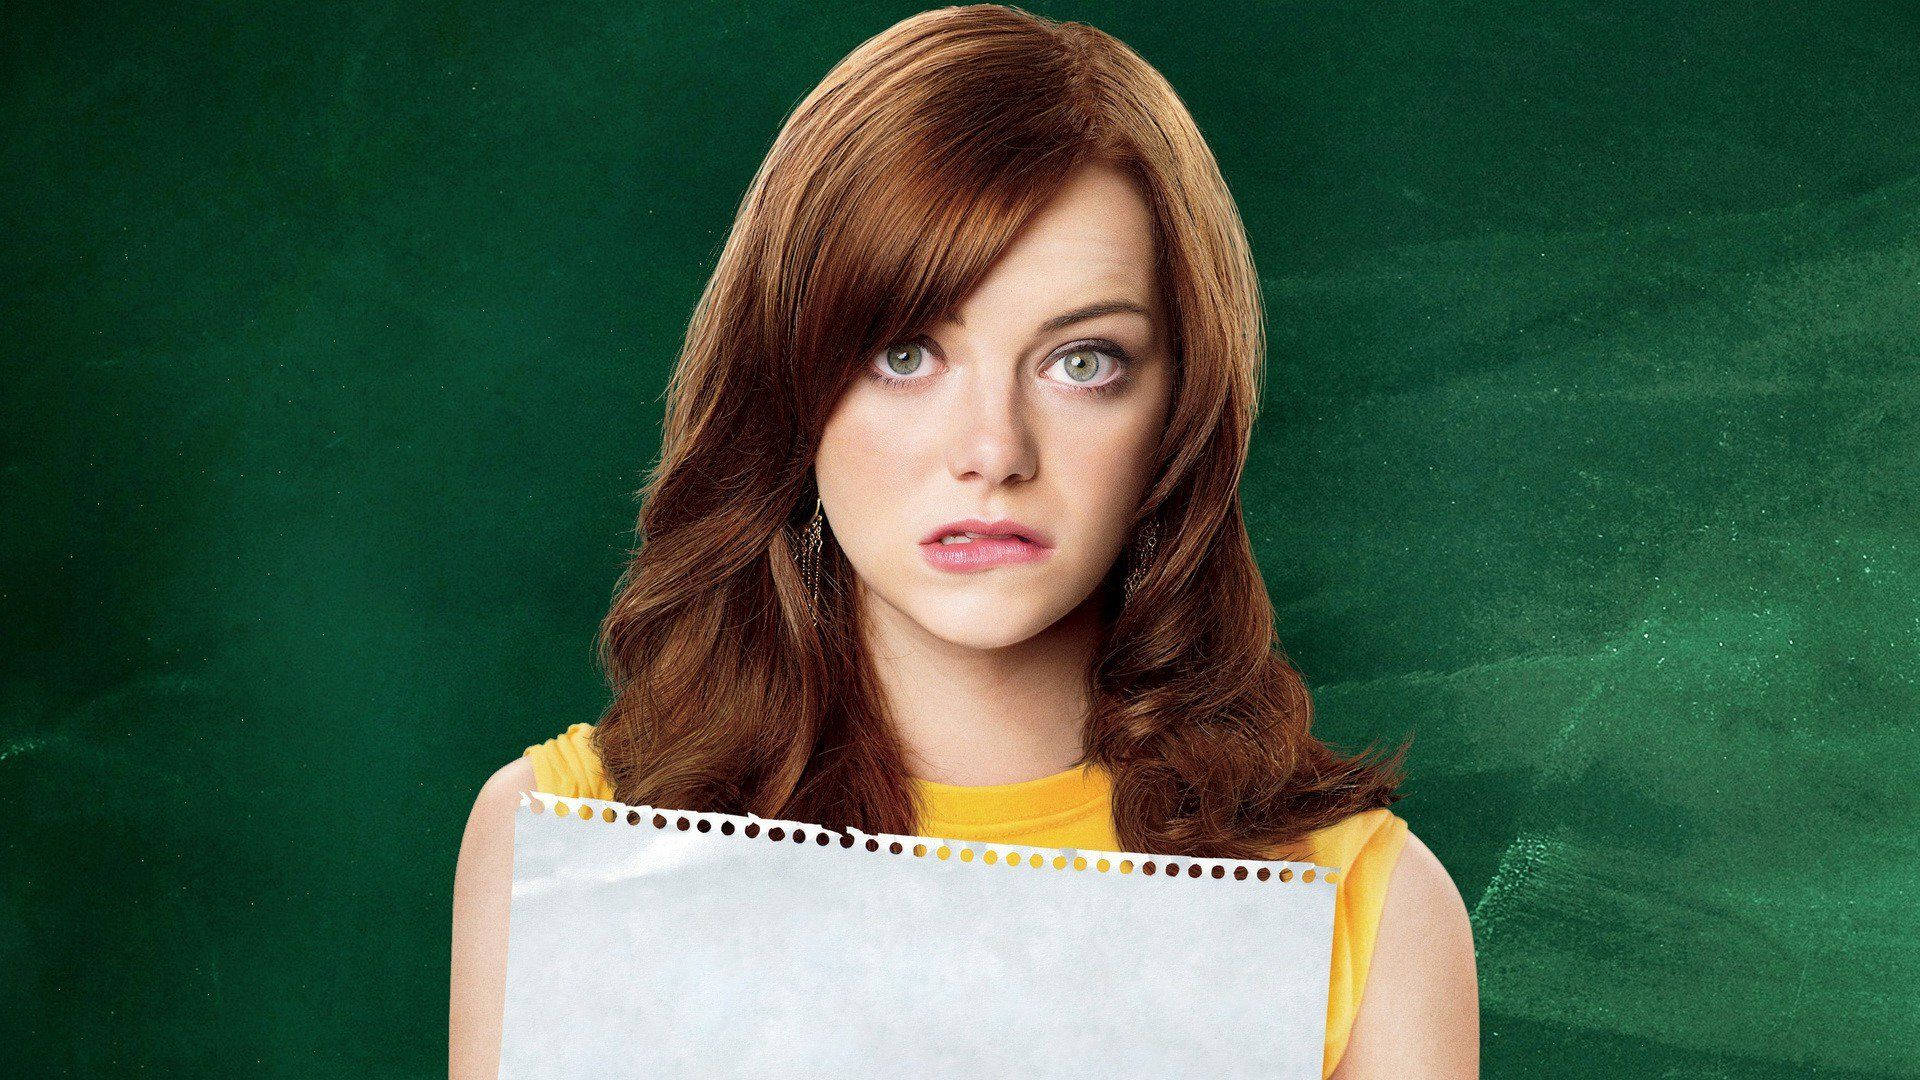 Emma Stone Stars As Olive Penderghast In The Romantic Comedy 